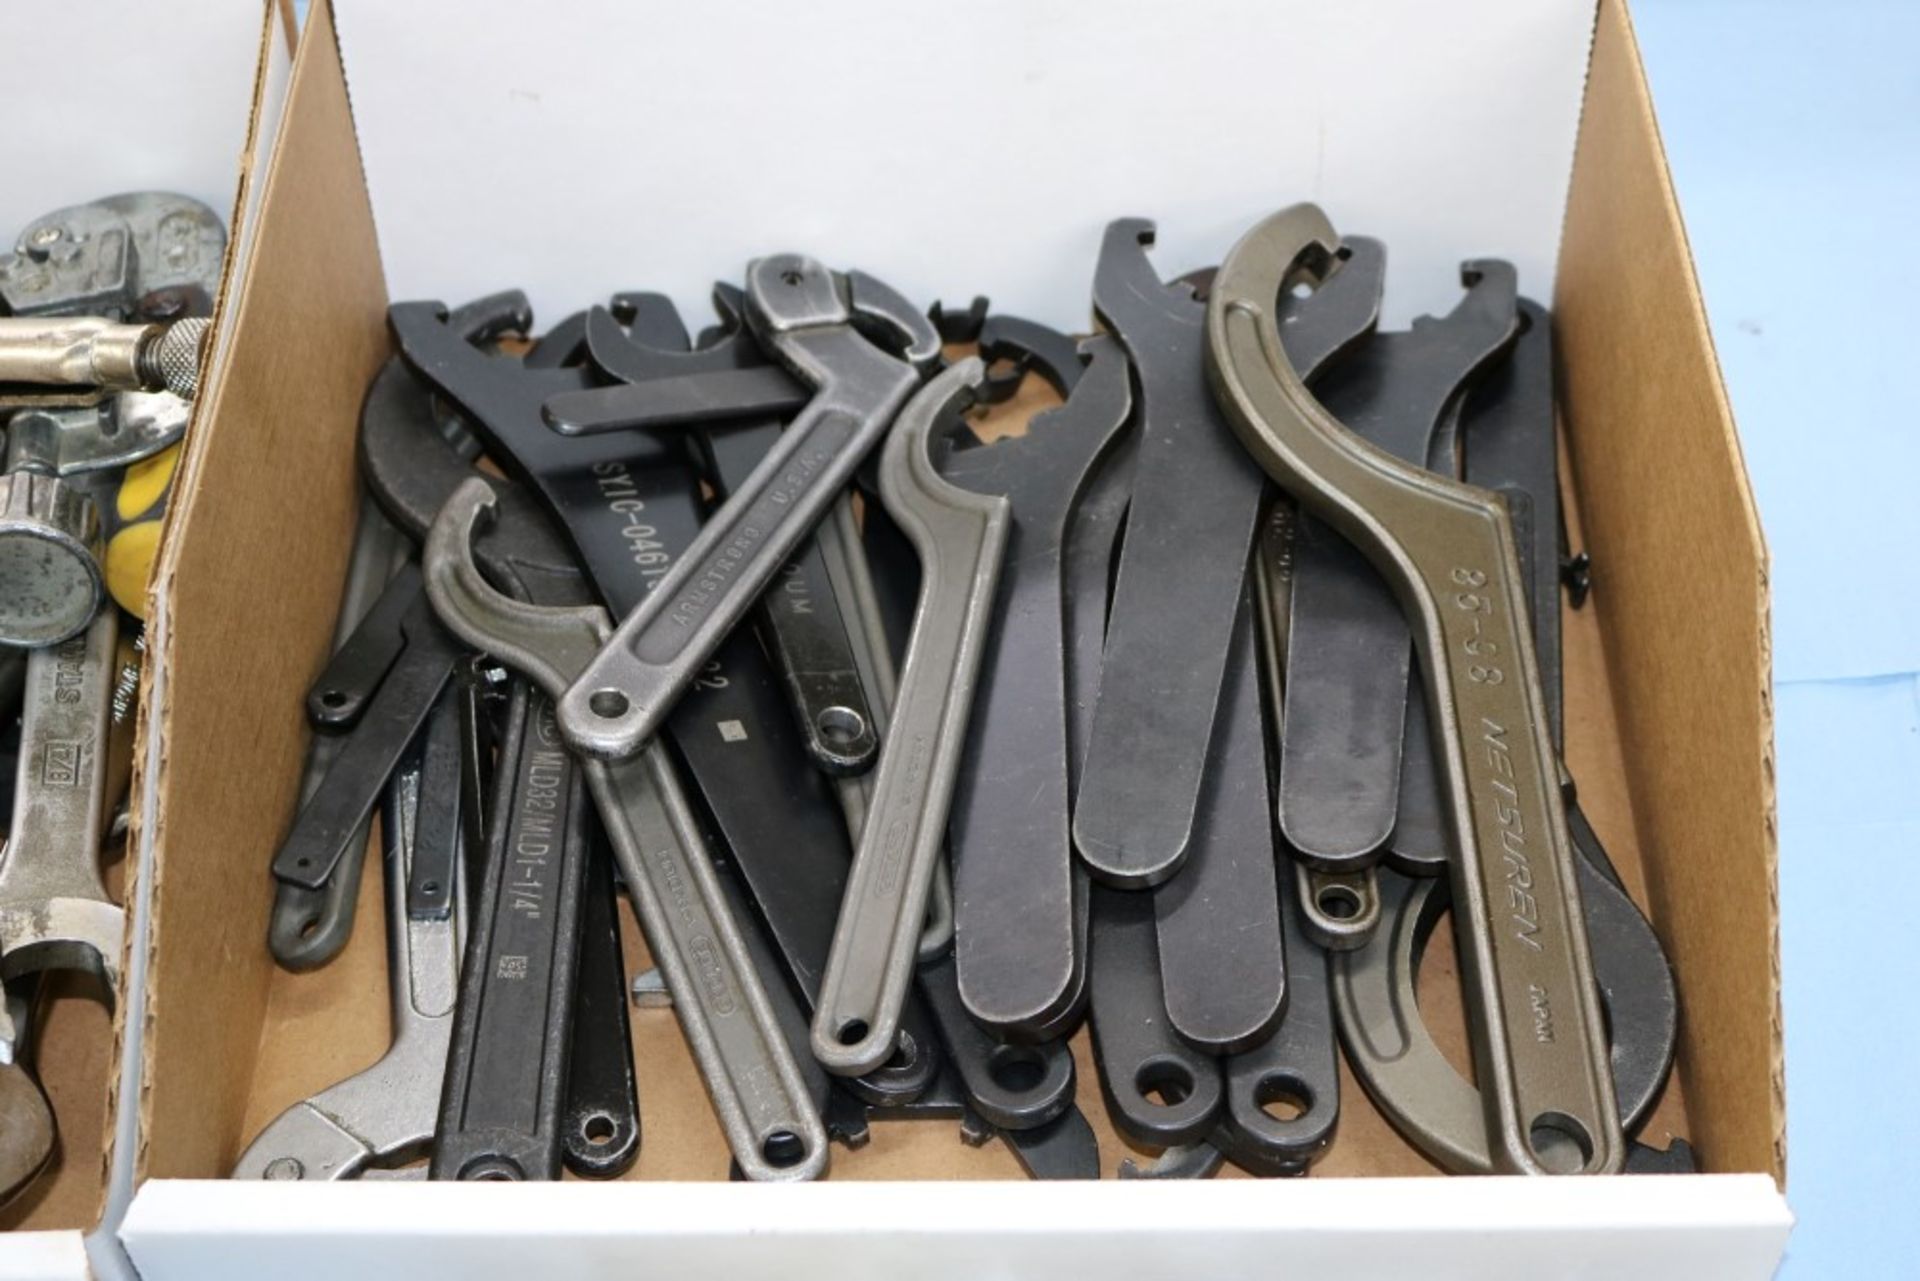 2 Boxes of Various Wrenches, Hammers, ER-32 Wrenches, CAT 40 Wrenches and Others - Image 3 of 5